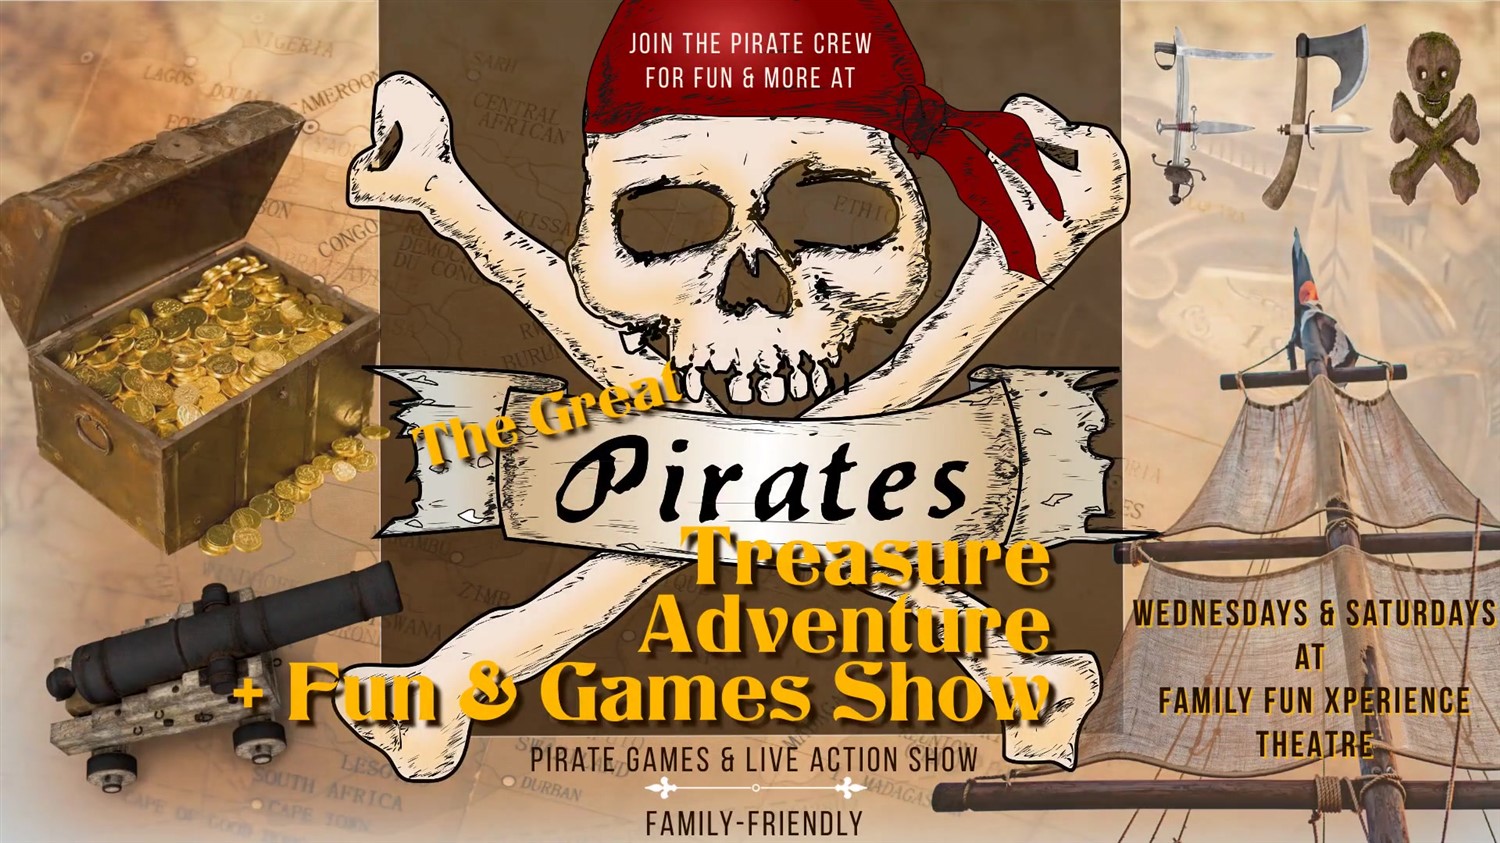 PIRATE ADVENTURE FUN & GAMES SHOW 5-Star Xperience with the Foggy FoX Pirates! on ago. 17, 19:00@FFX Theatre - Pick a seat, Buy tickets and Get information on Family Fun Xperience tickets.ffxshow.org